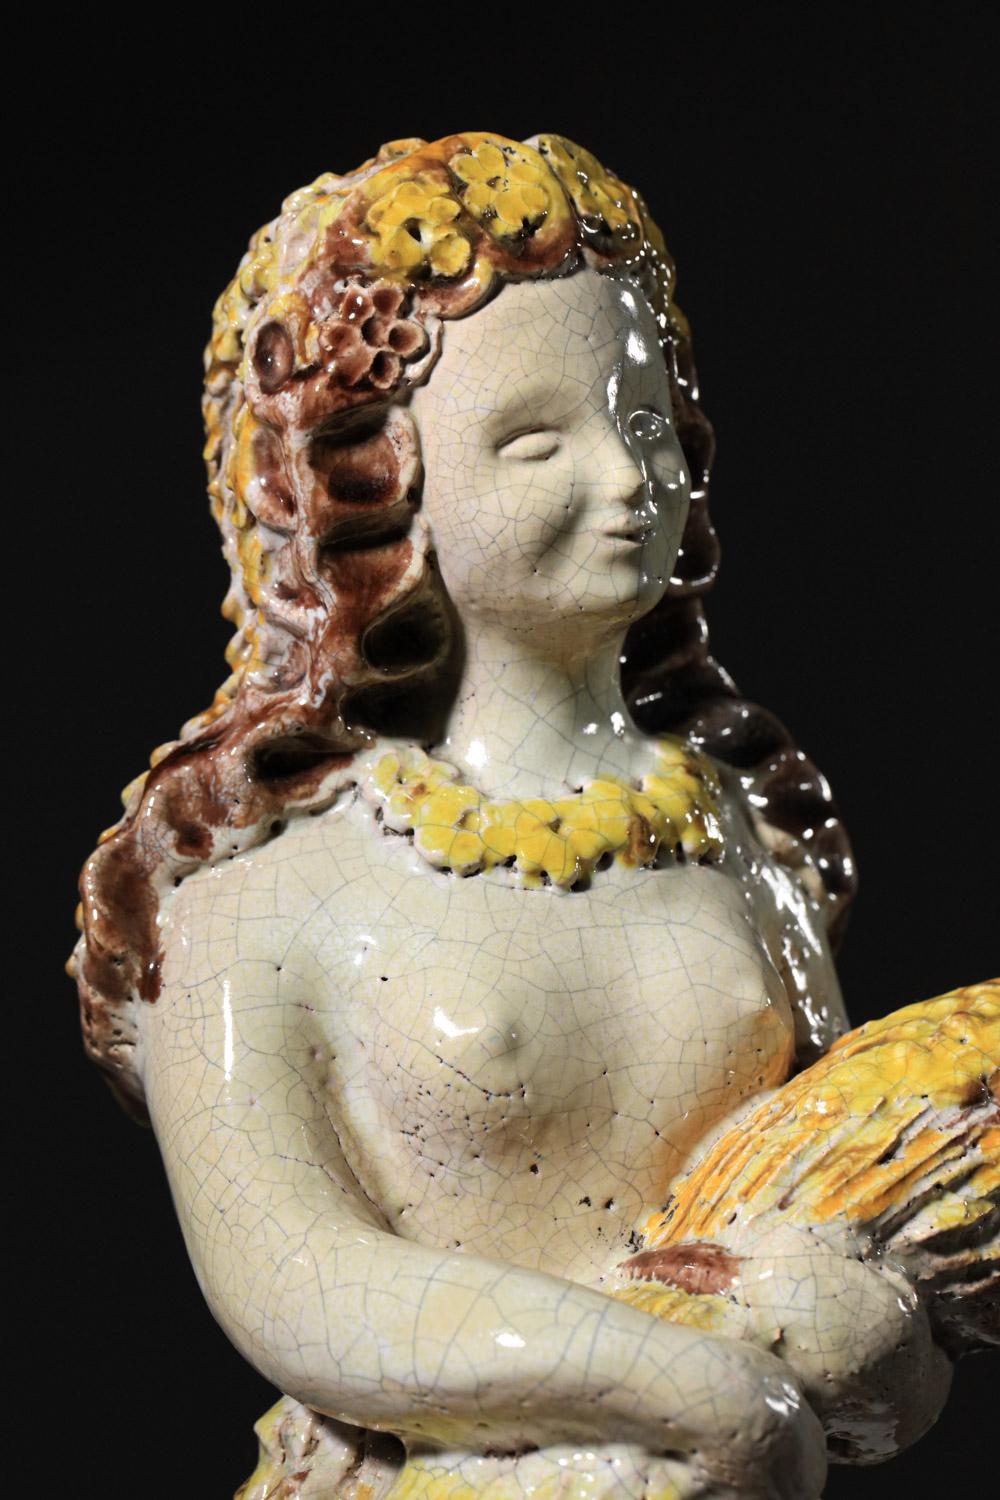 Ceramic goddess by Denise Picard from the Paul Pouchol workshop H687 
Large ceramic by the French artist Denise Picard signed by the Paul Pouchol studio in the 1940s. 
Glazed ceramic in shades of yellow and white depicting Ceres, the goddess of